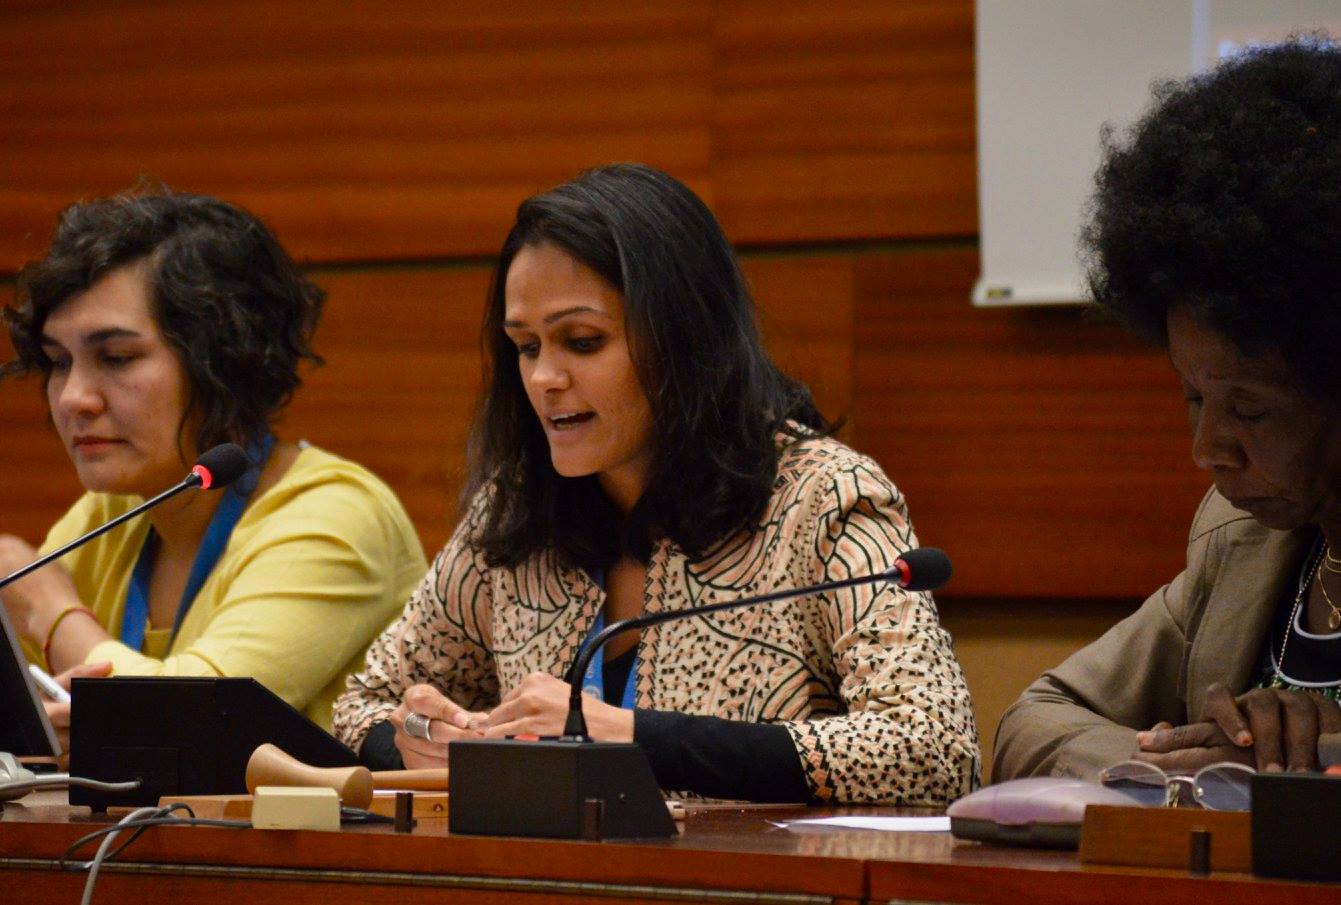 ISHR's Pooja Patel speaking at the Human Rights Council